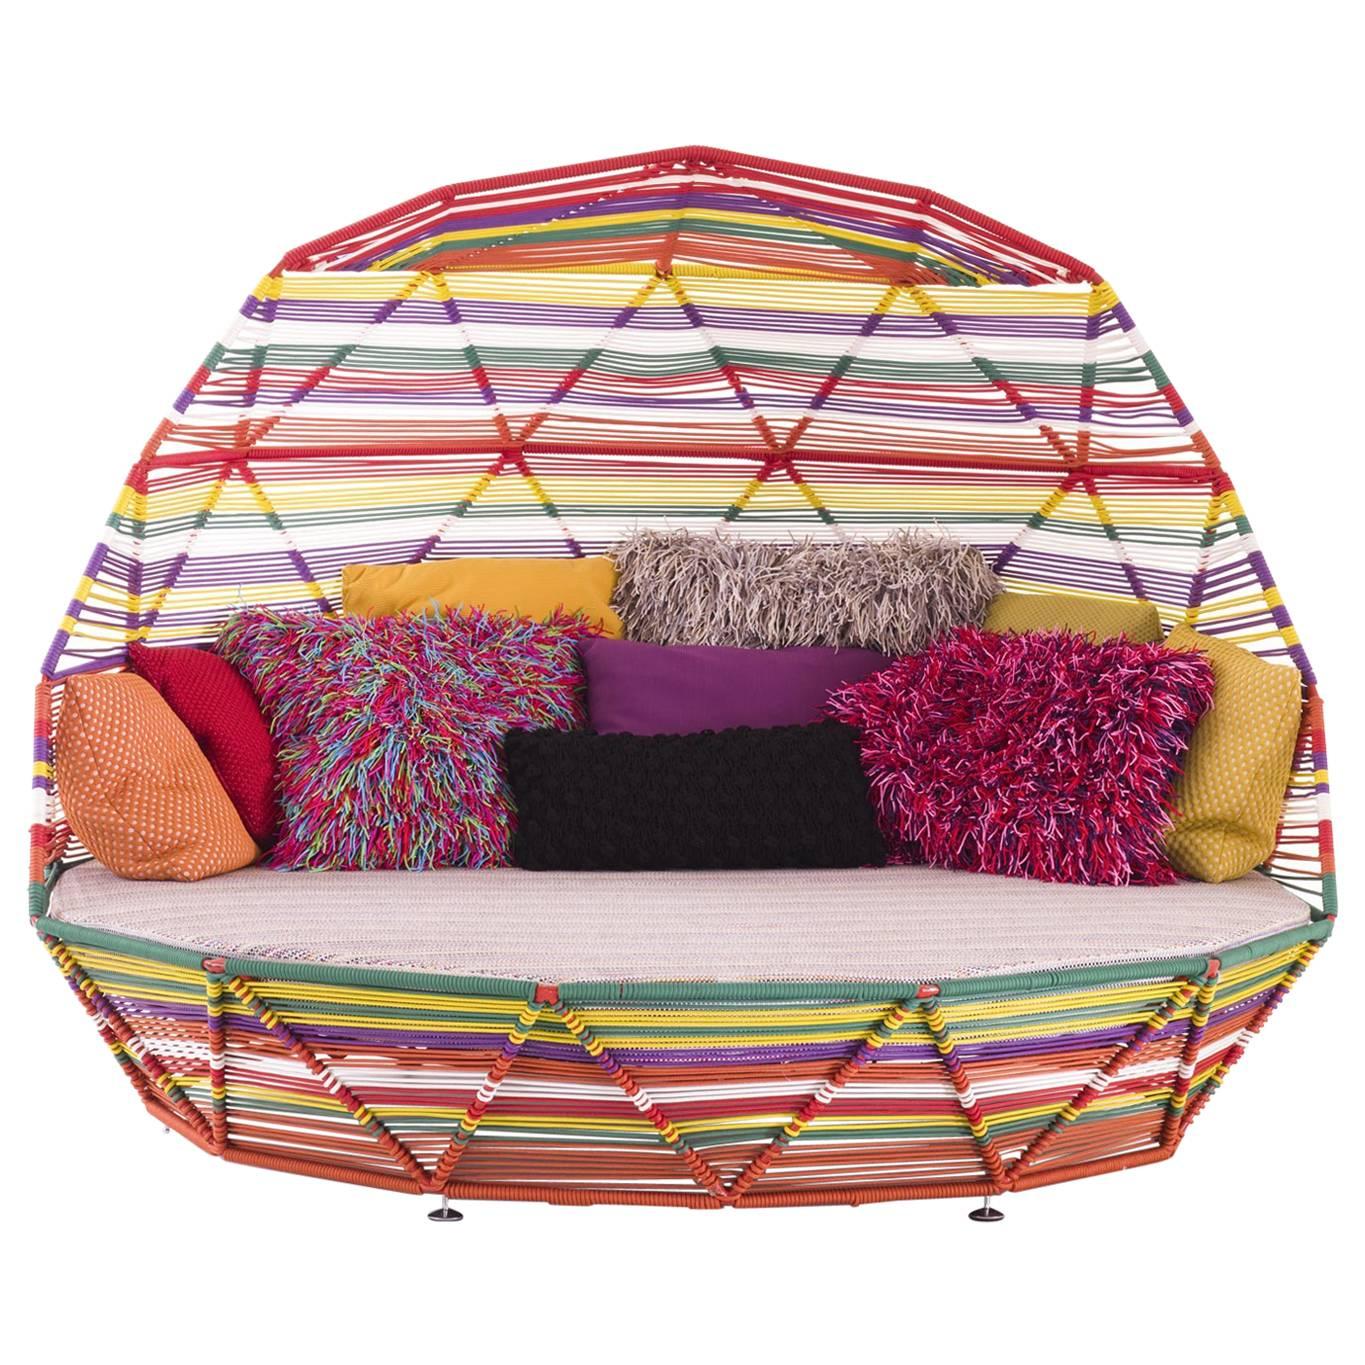 Moroso Tropicalia Daybed for Indoor and Outdoor For Sale